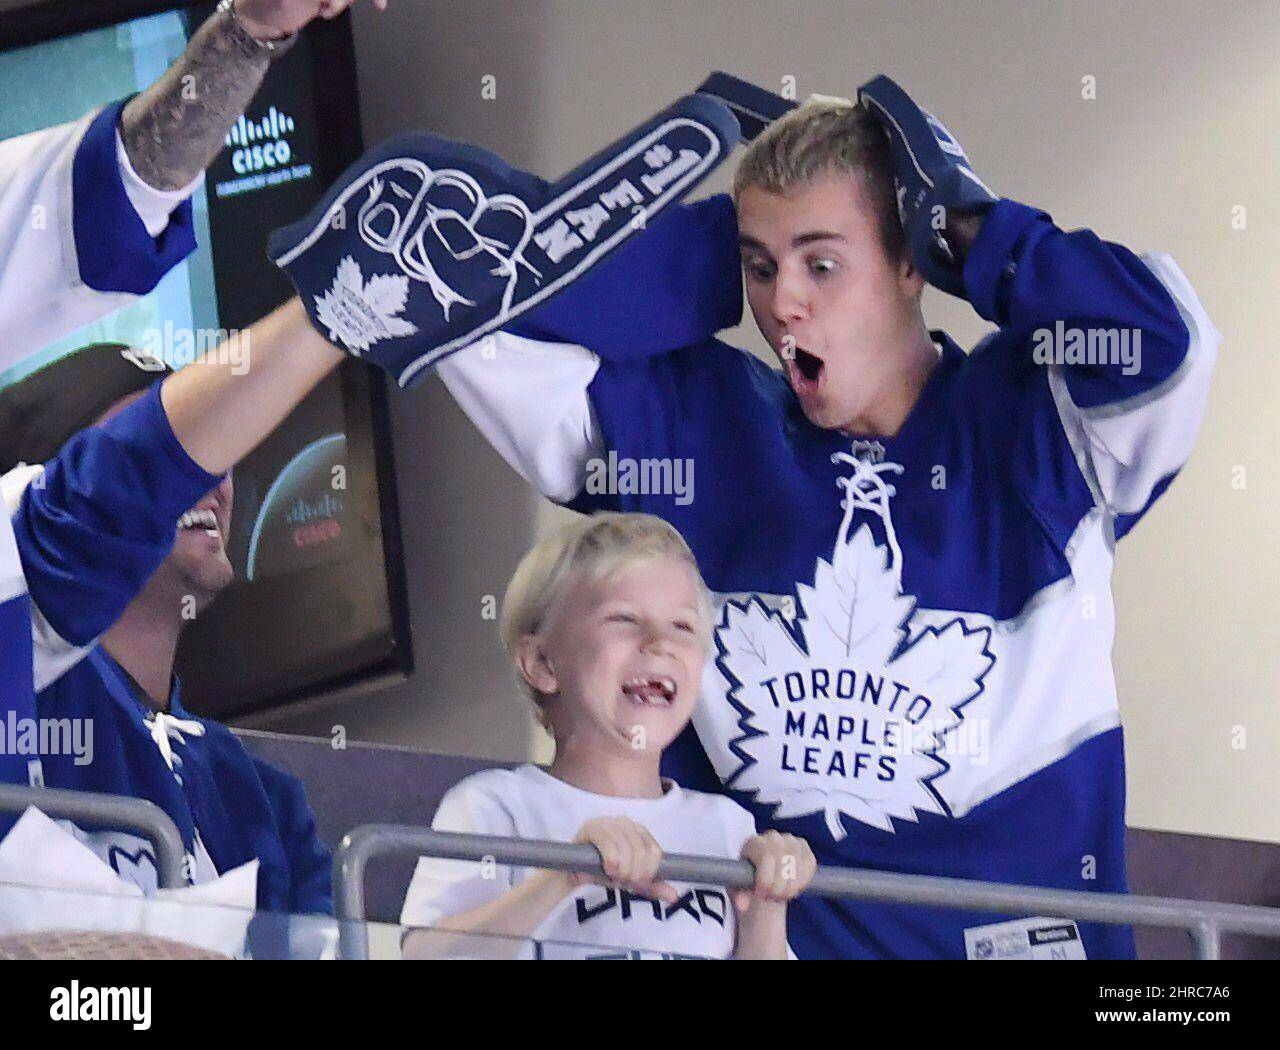 Maple Leafs collaborate with Justin Bieber on Next Gen jersey